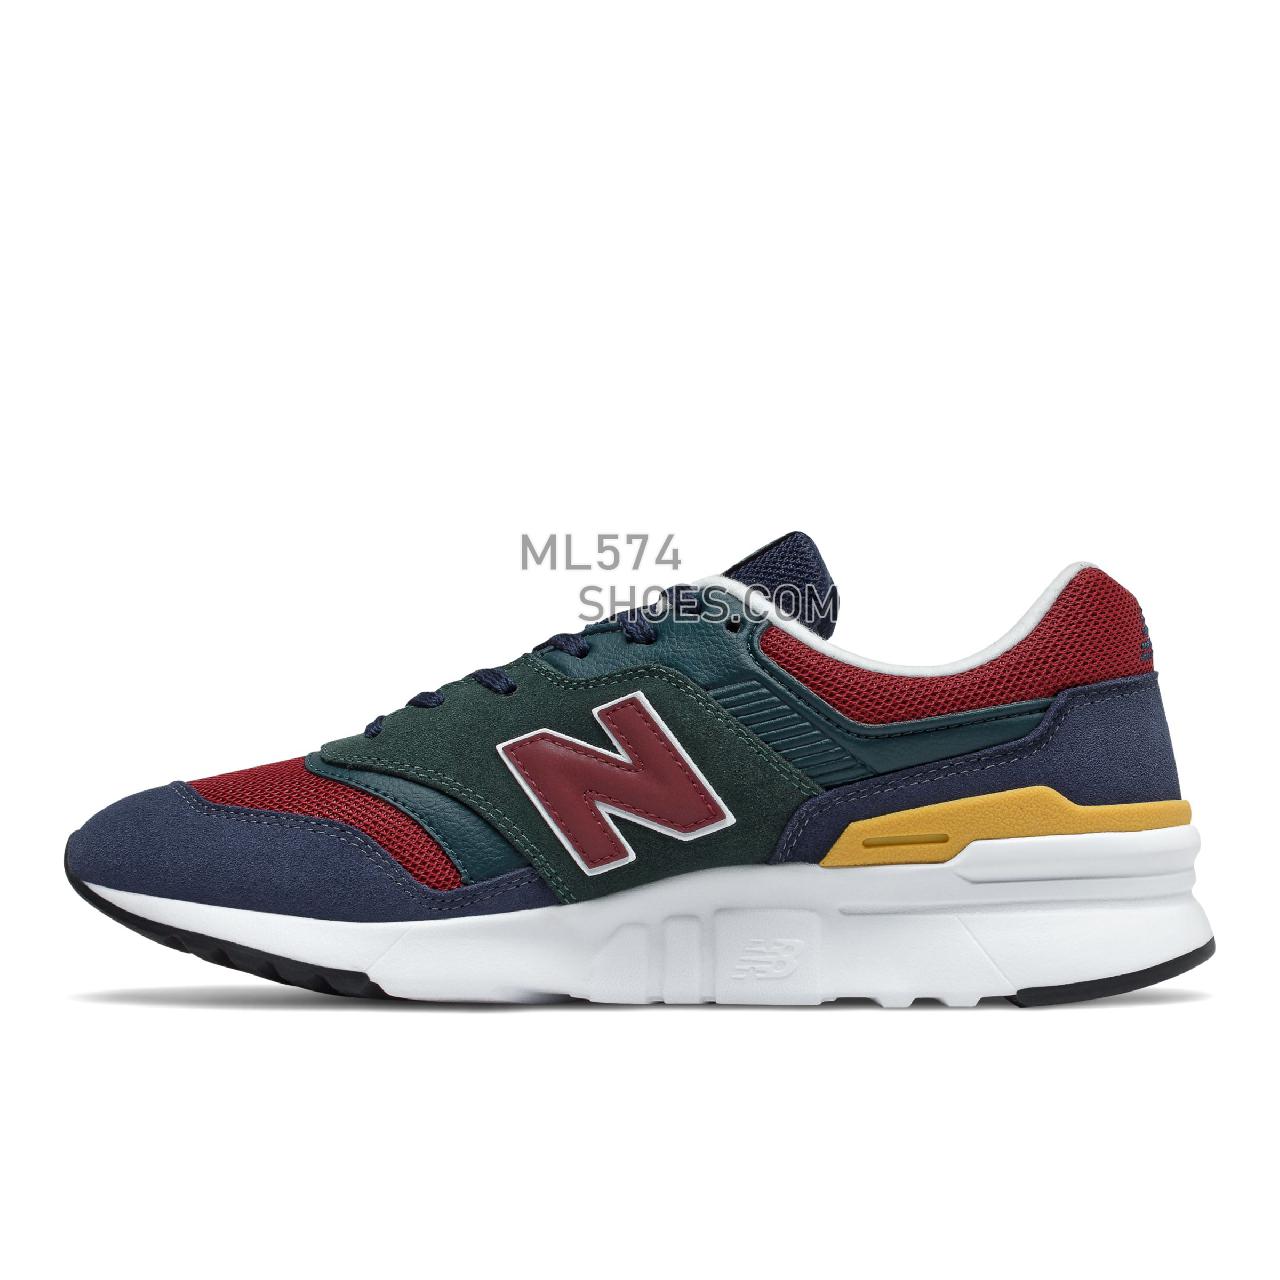 New Balance 997H - Men's Classic Sneakers - Black Emerald with Burgundy - CM997HVQ